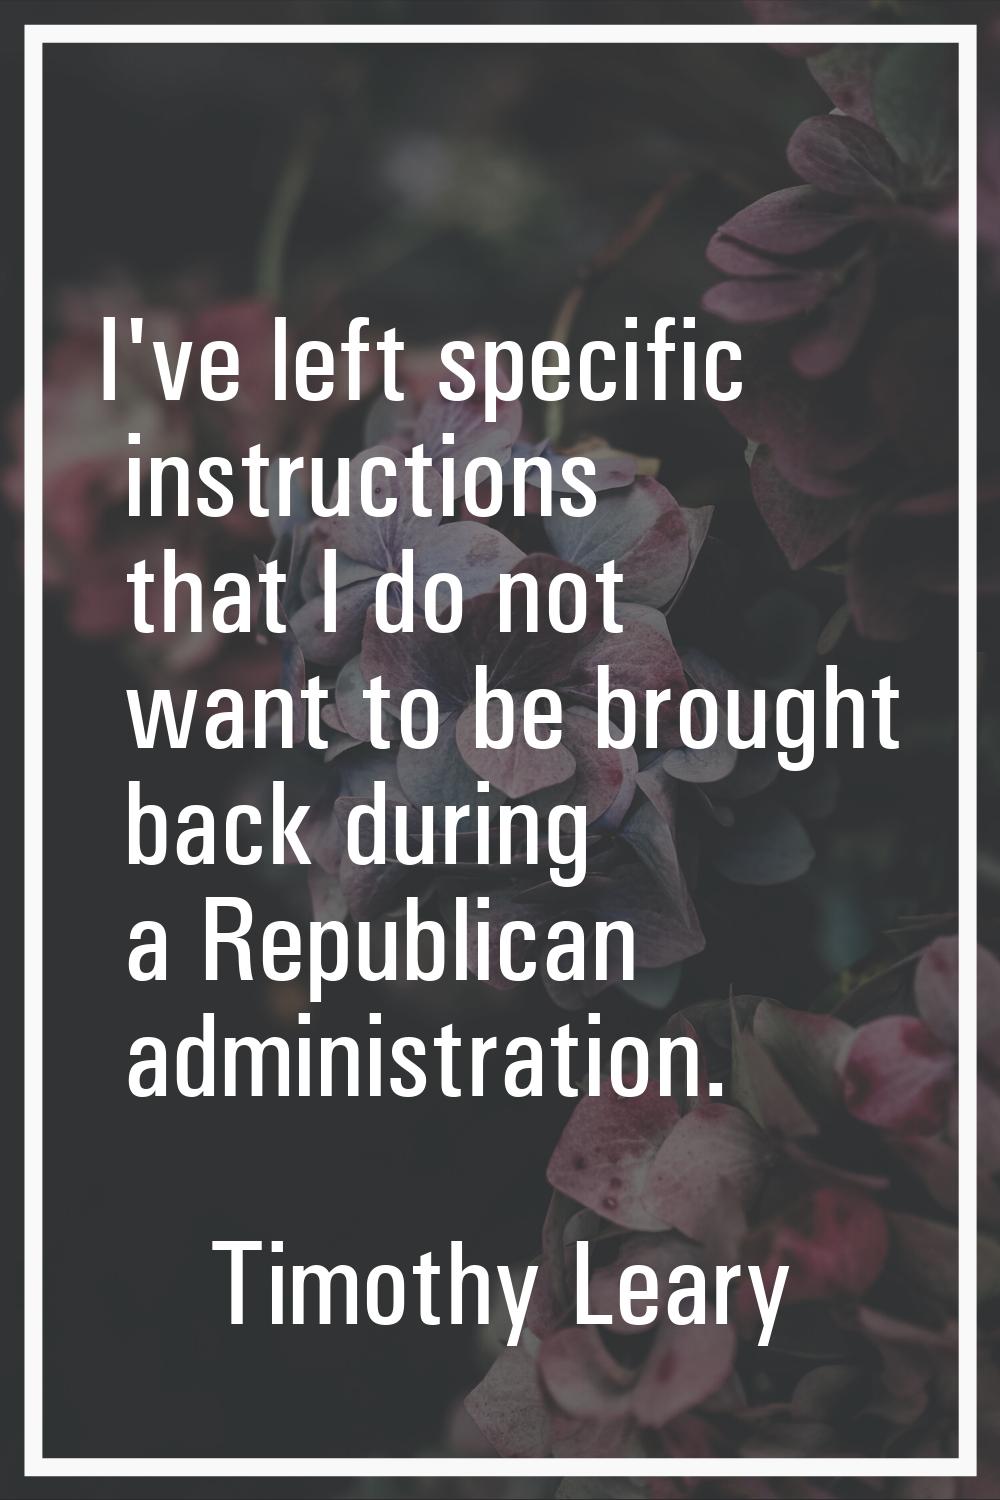 I've left specific instructions that I do not want to be brought back during a Republican administr